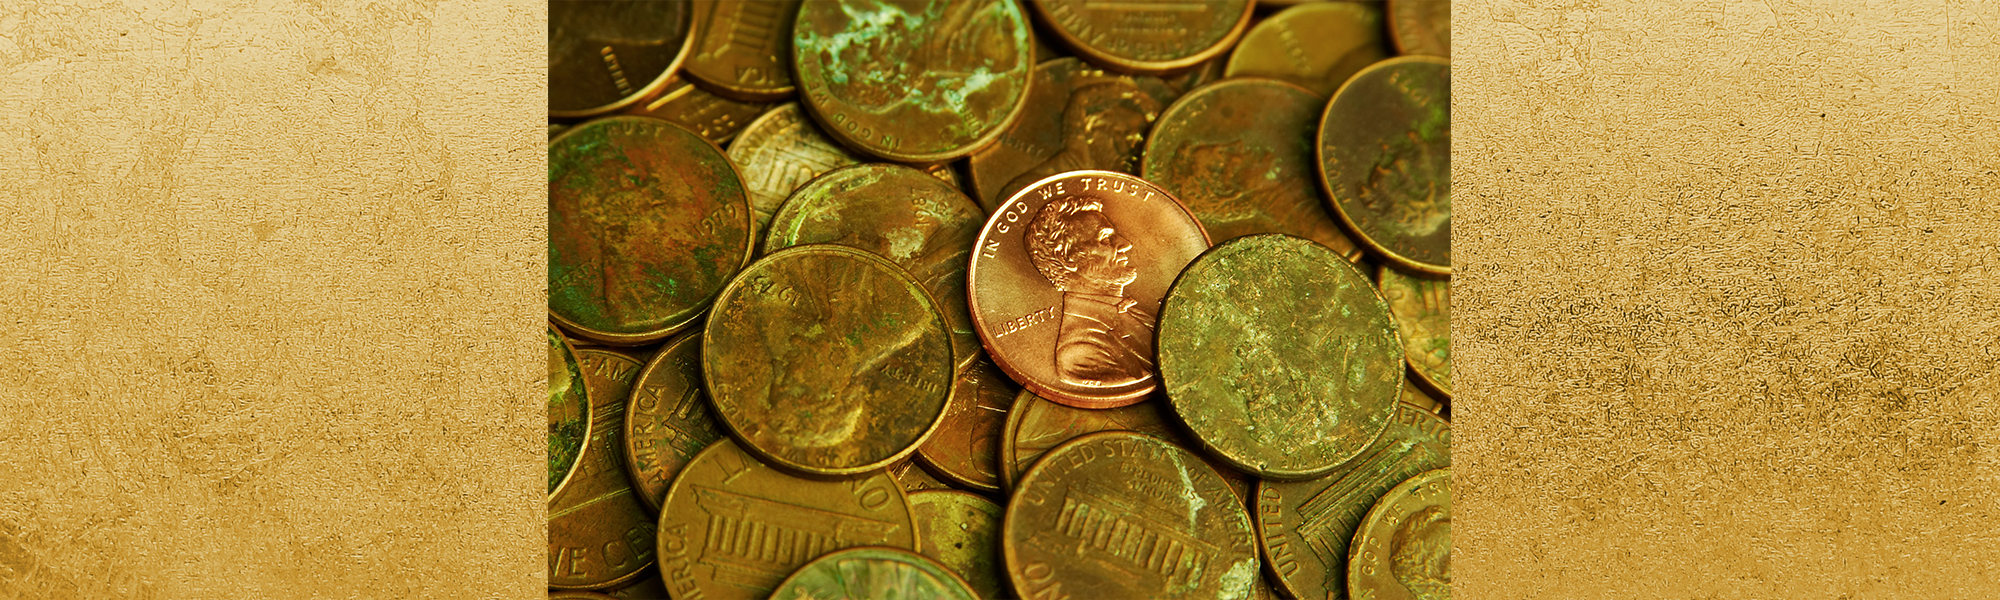 How To Clean Green Pennies & Coins